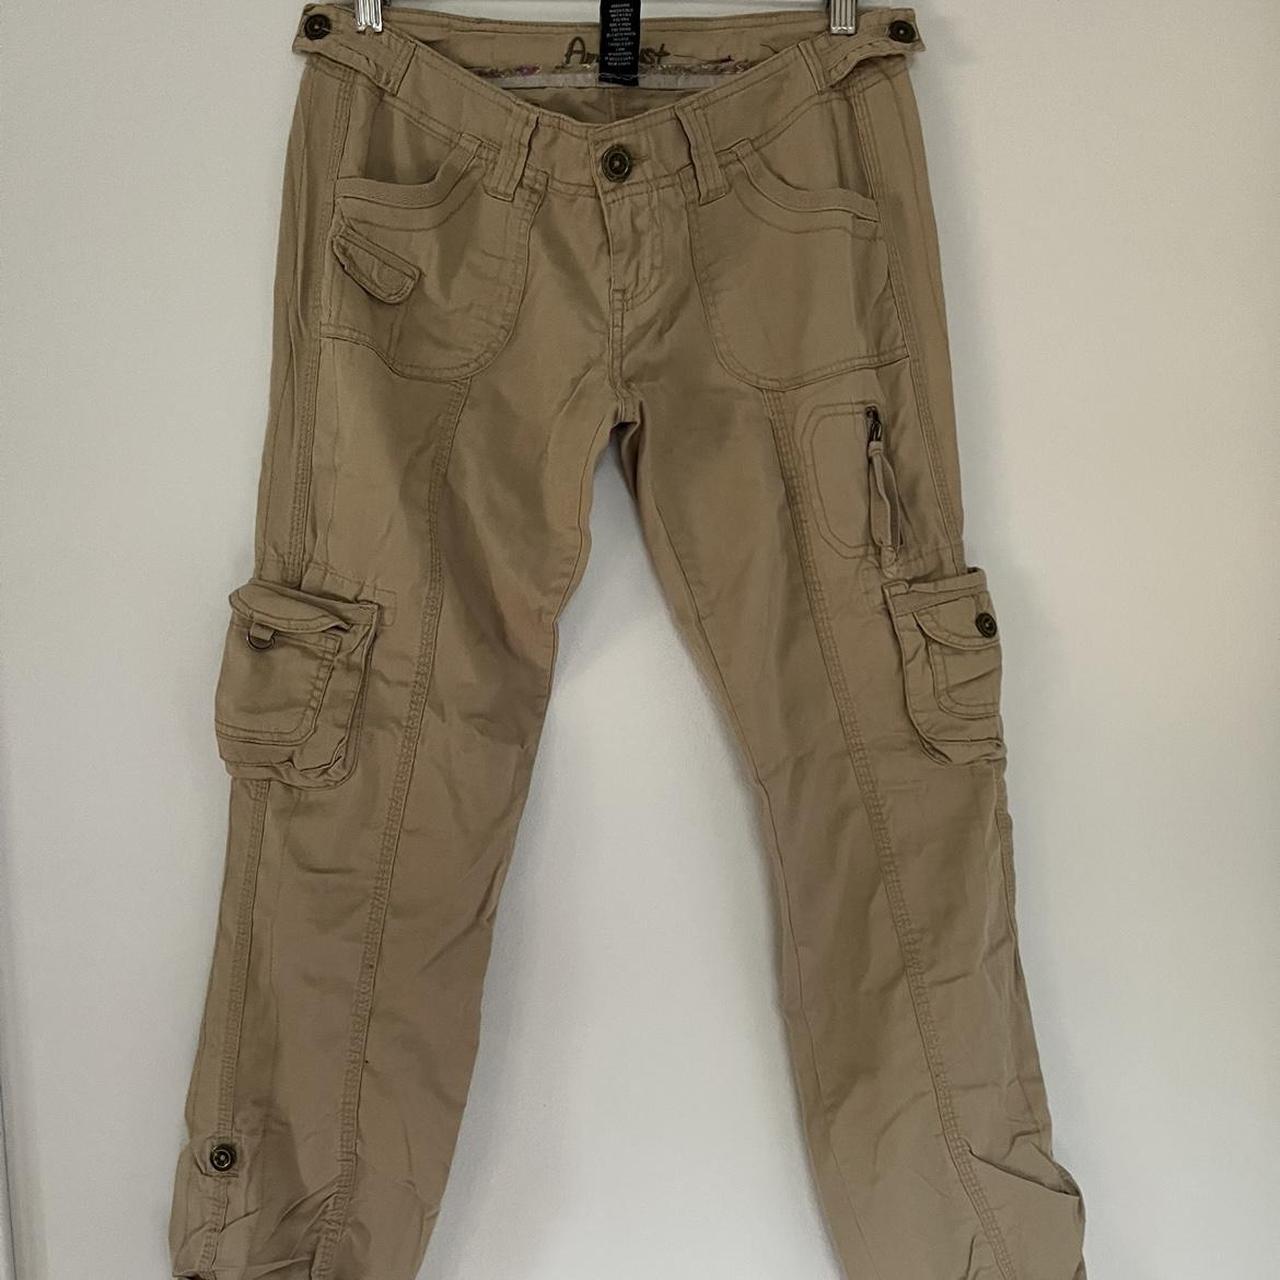 cute utility pants size 3 inseam is about 27 - Depop